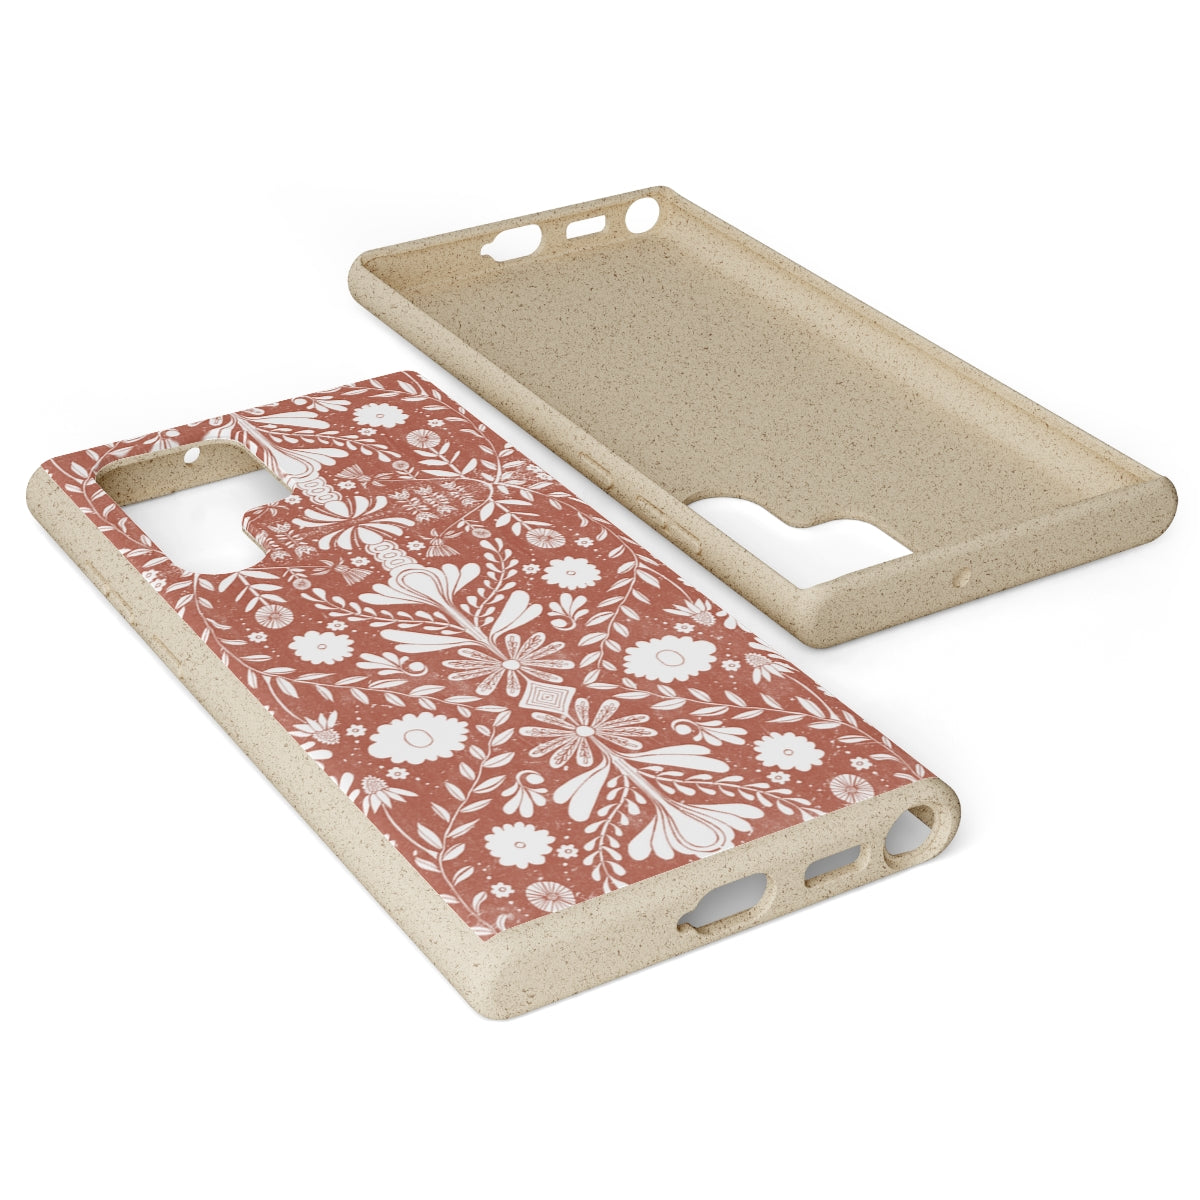 Biodegradable Cases [Fire]